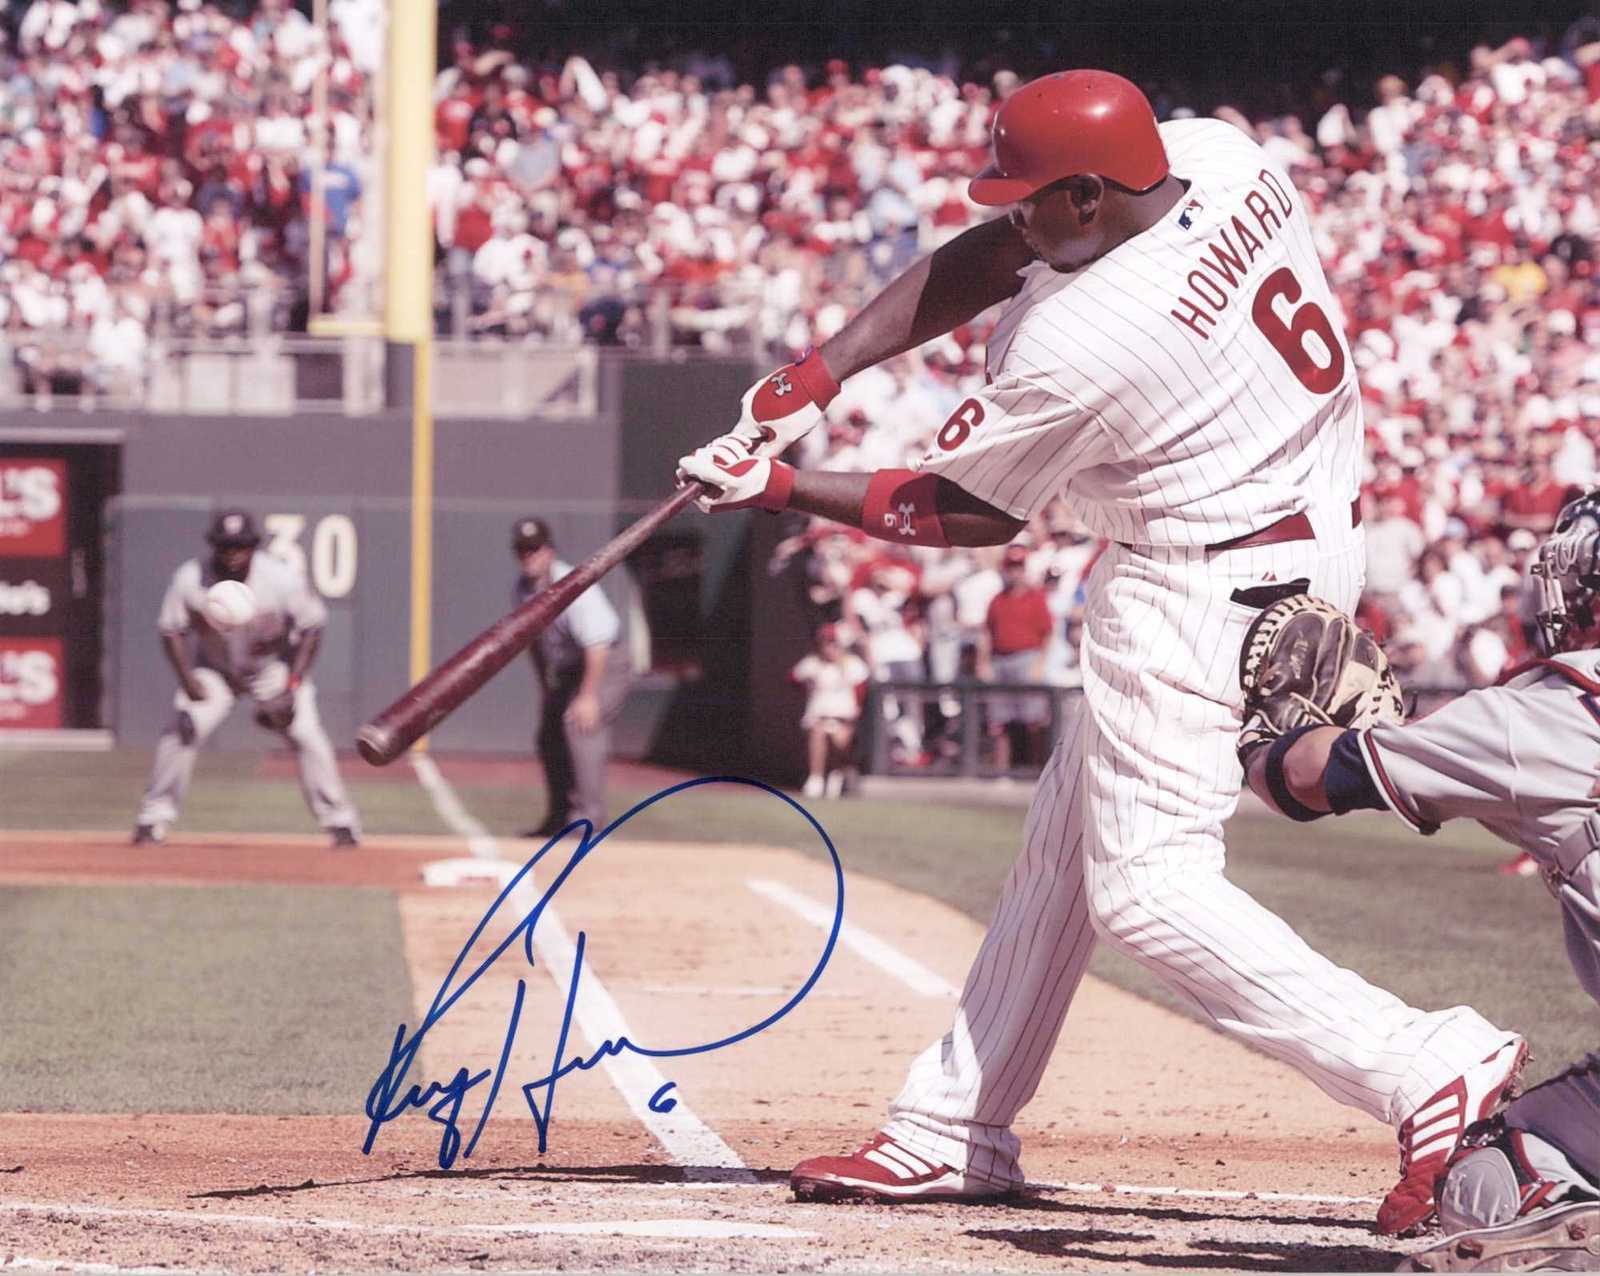 Primary image for Ryan Howard Signed Autographed Glossy 8x10 Photo - Philadelphia Phillies